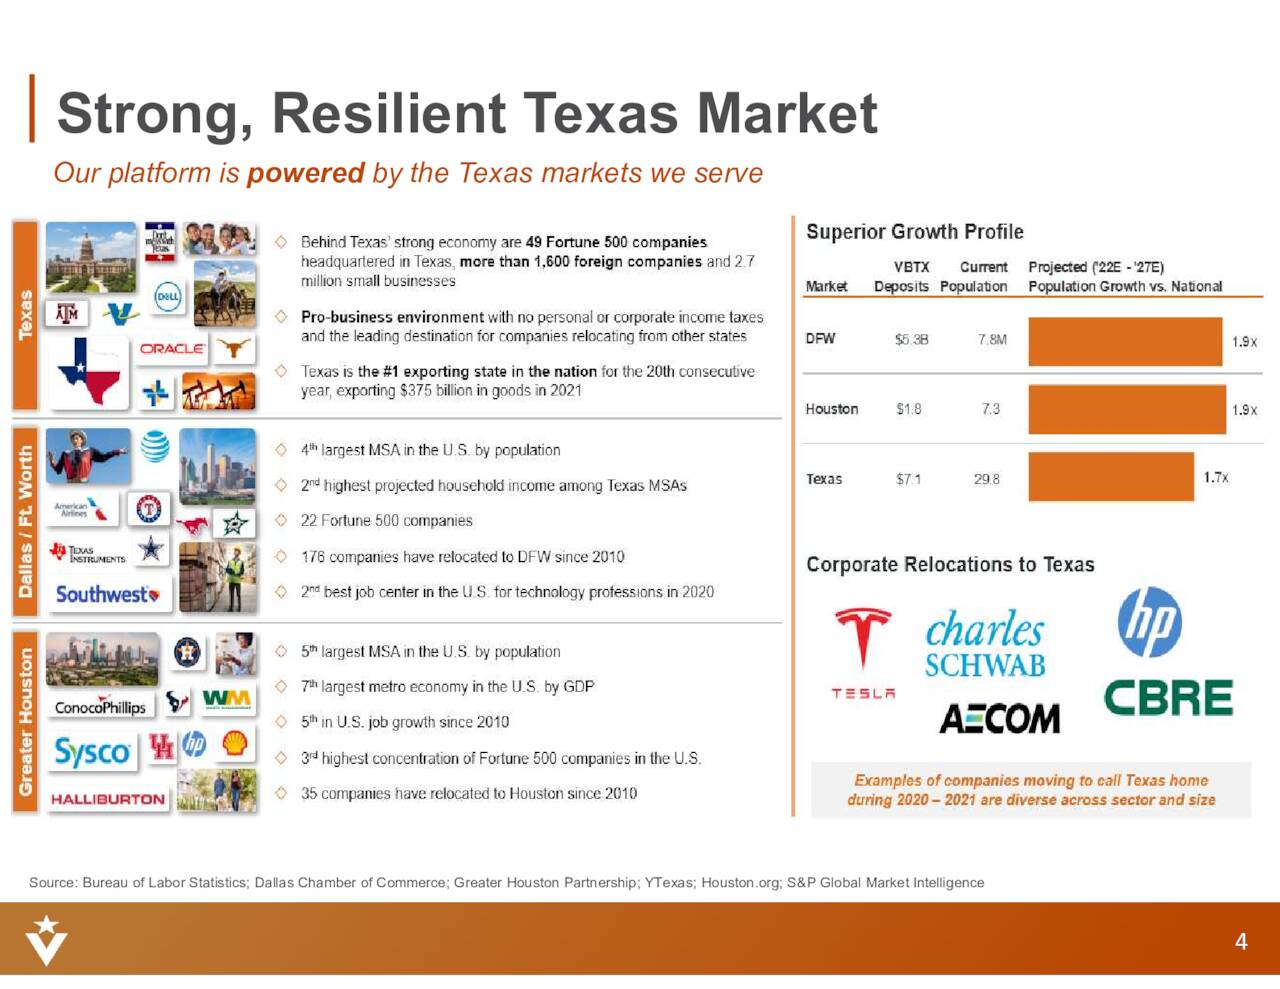 Strong, Resilient Texas Market